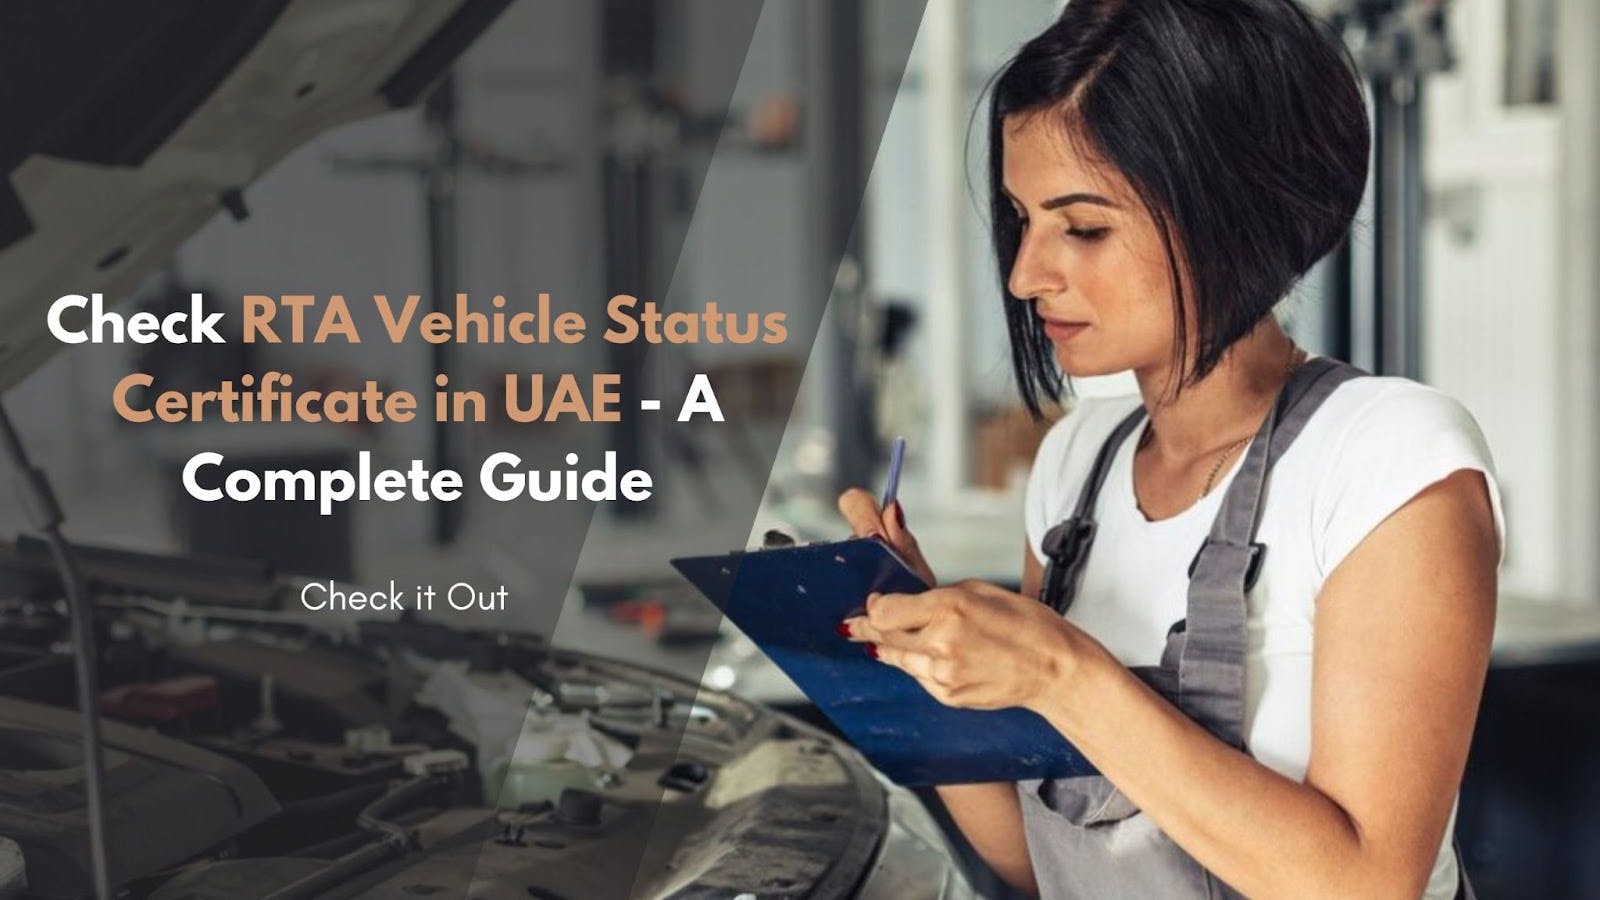 Steps to Check the RTA Vehicle Status Certificate in the UAE